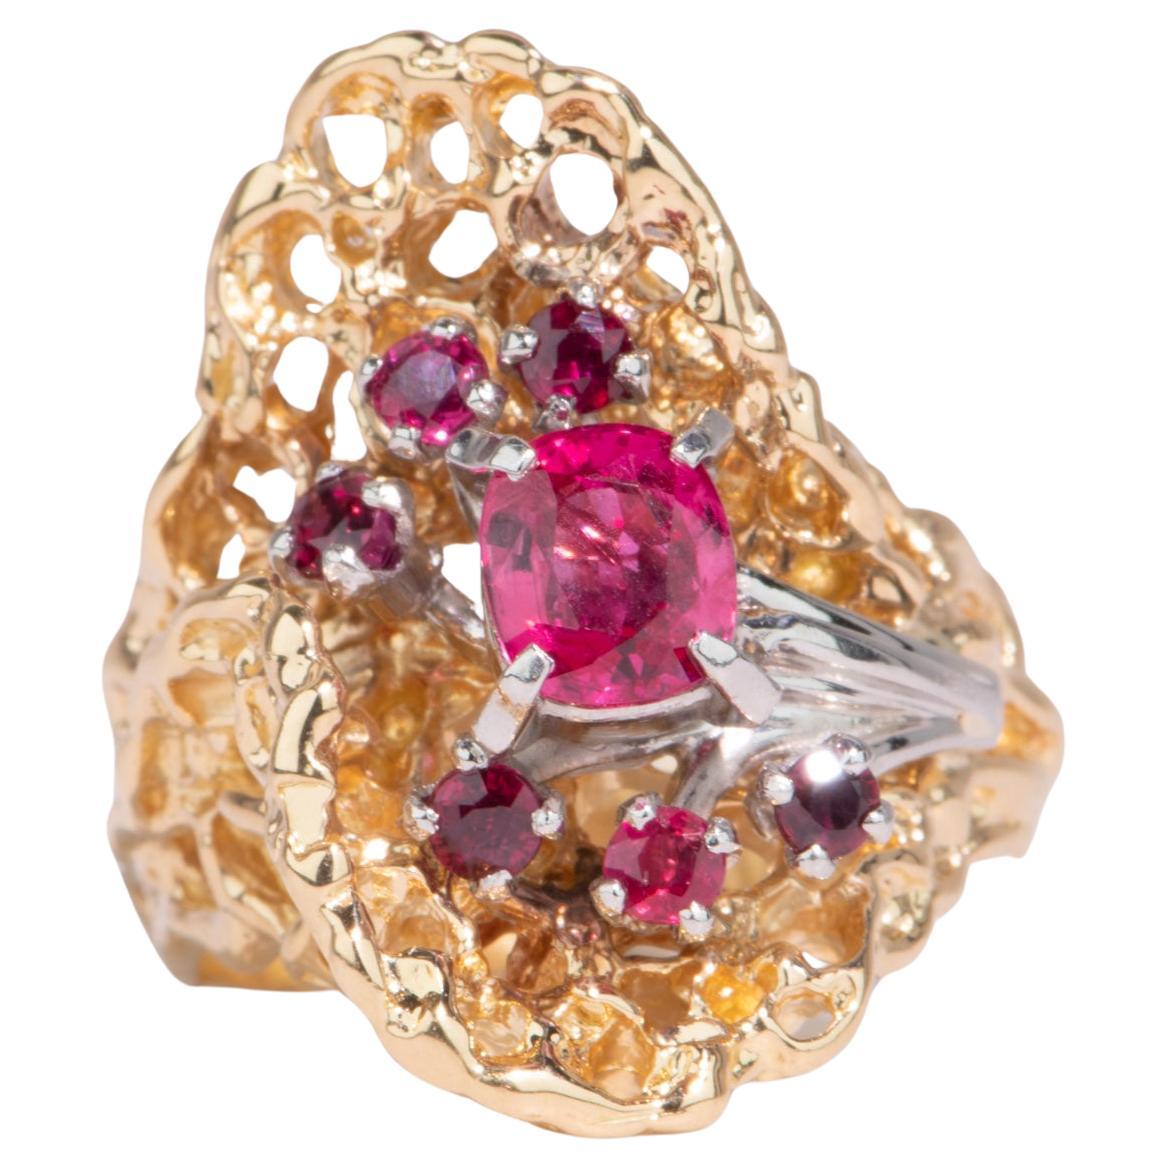 Organic Modernist Style Statement Ring with Tourmaline Clusters 18K Gold V1106 For Sale